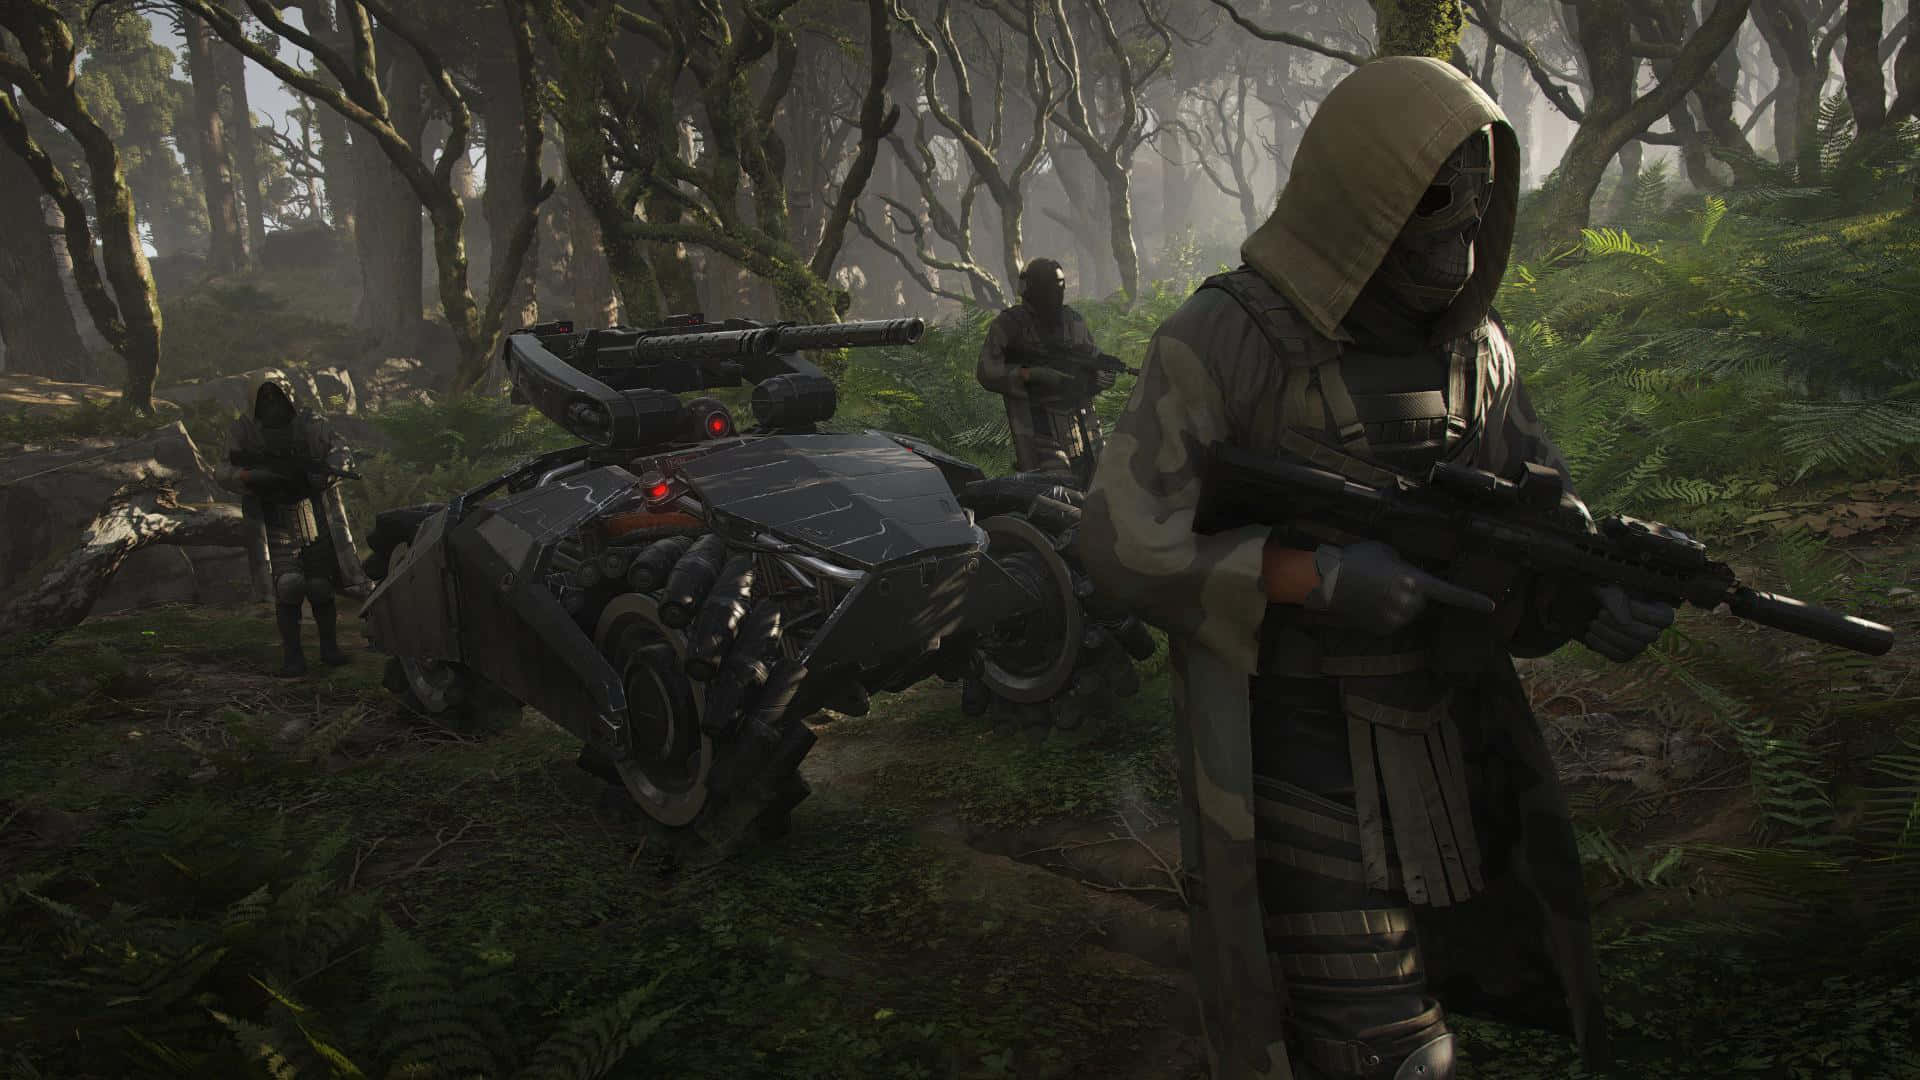 "Experience your best Ghost Recon gaming session yet!" Wallpaper